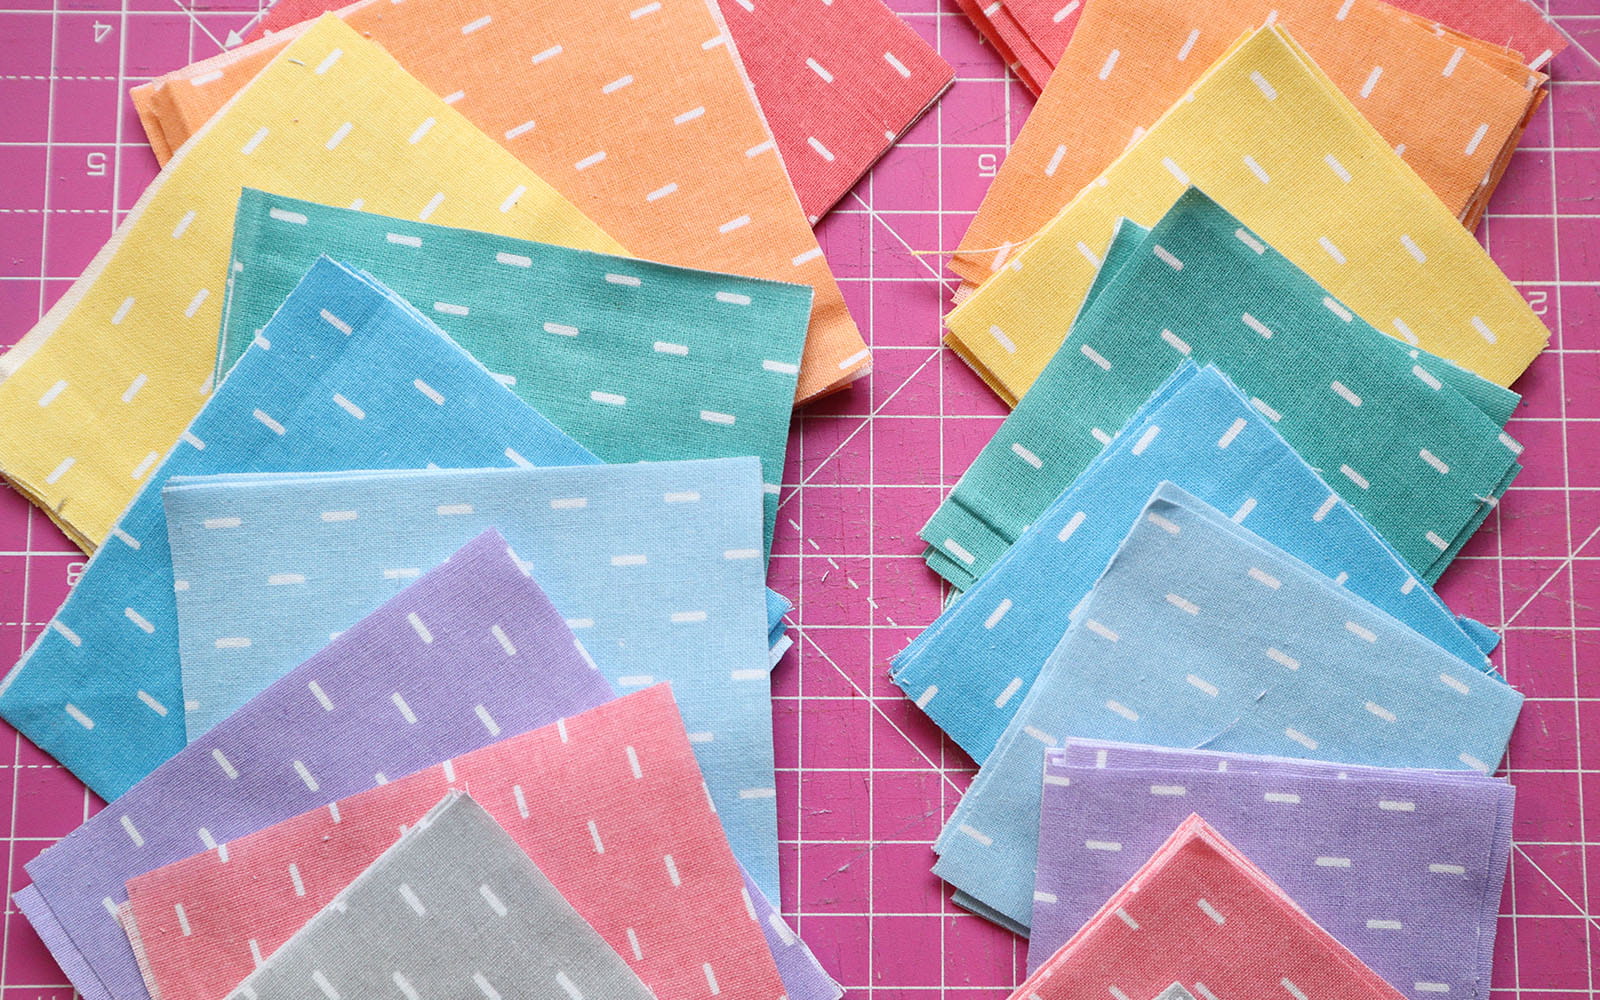 Stacks of fabric squares in different pastel colours and sizes